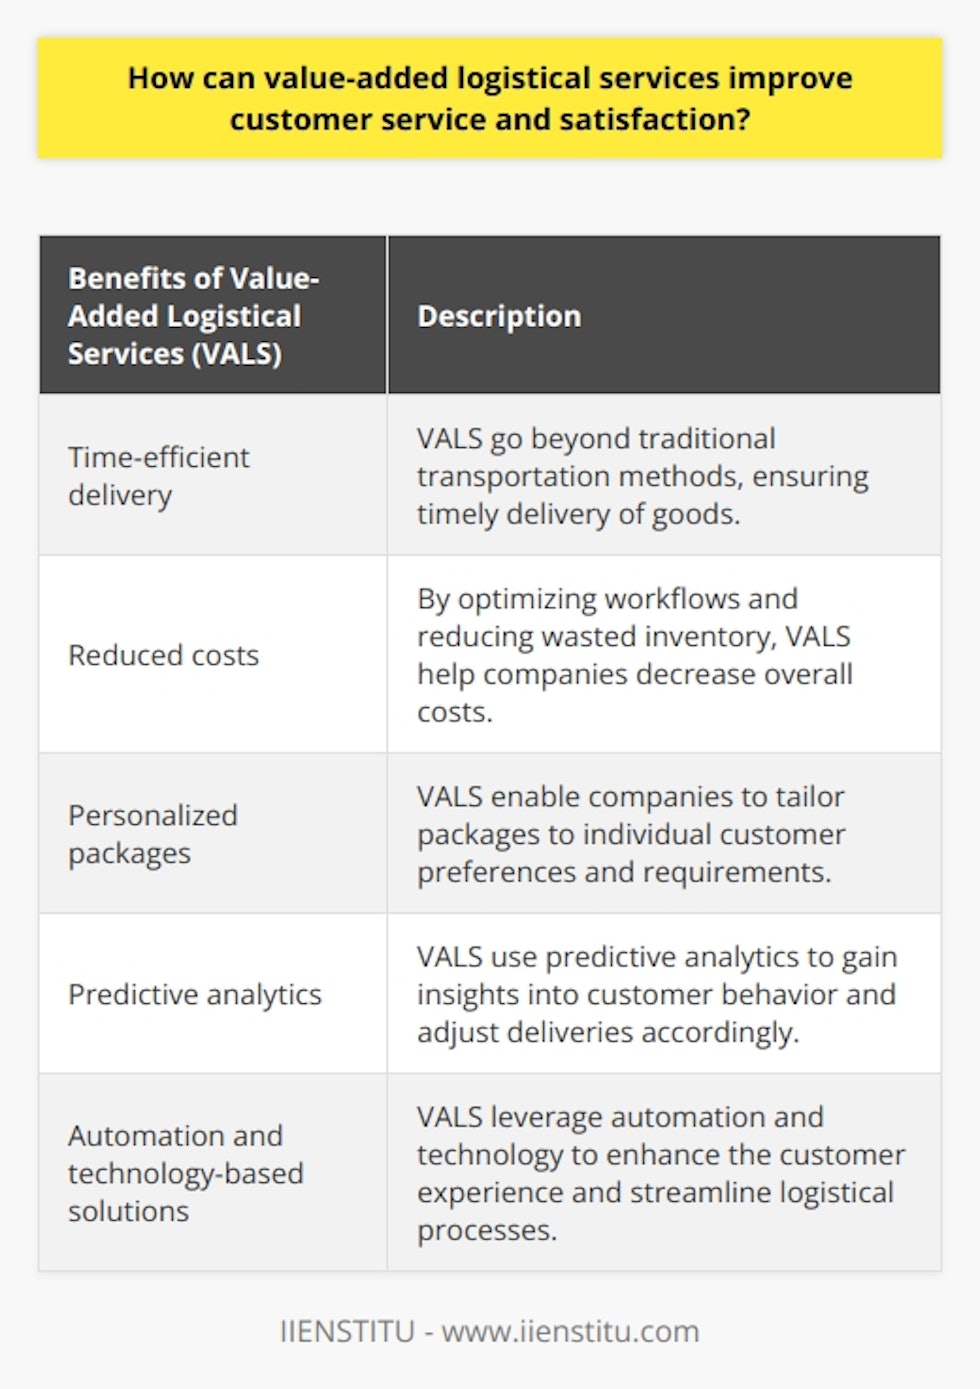 Value-added logistical services (VALS) have the potential to greatly improve customer service and satisfaction in various ways. By going beyond traditional transportation methods, VALS offer added benefits such as time-efficient delivery, reduced costs, and personalized packages. Leveraging technology-based solutions like robotics and automation further enhances the customer experience and streamlines the logistical process.One key advantage of VALS is its ability to provide value throughout the entire logistics process. Unlike traditional services that focus solely on moving goods, VALS offer additional benefits that cater to customer needs. For example, predictive analytics can be used to gain insights into customer behavior and automatically adjust deliveries to suit their preferences. This level of personalization not only enhances customer satisfaction but also increases loyalty.Furthermore, VALS enable companies to provide customers with tailored packages that reflect their individual preferences and requirements. By understanding the customer on a deeper level, companies can create a more personalized experience, fostering a stronger connection and loyalty. This level of customization sets VALS apart from traditional logistical services and greatly enhances the customer service aspect.Another significant advantage of VALS is its potential for cost reduction. By optimizing workflows and reducing wasted inventory, companies can decrease overall costs. Streamlining the logistical process through automation and technology-based solutions leads to greater efficiency and effectiveness. This, in turn, allows companies to allocate resources more effectively, resulting in cost savings that can be passed on to the customer.In conclusion, VALS play a crucial role in improving customer service and satisfaction. By employing automation, predictive analytics, and other technology-based solutions, businesses can provide a superior customer experience while streamlining their logistical operations. This not only reduces costs but also increases customer loyalty, ultimately benefiting the company's bottom line. Adopting VALS is therefore essential for any business looking to excel in customer service and satisfaction.